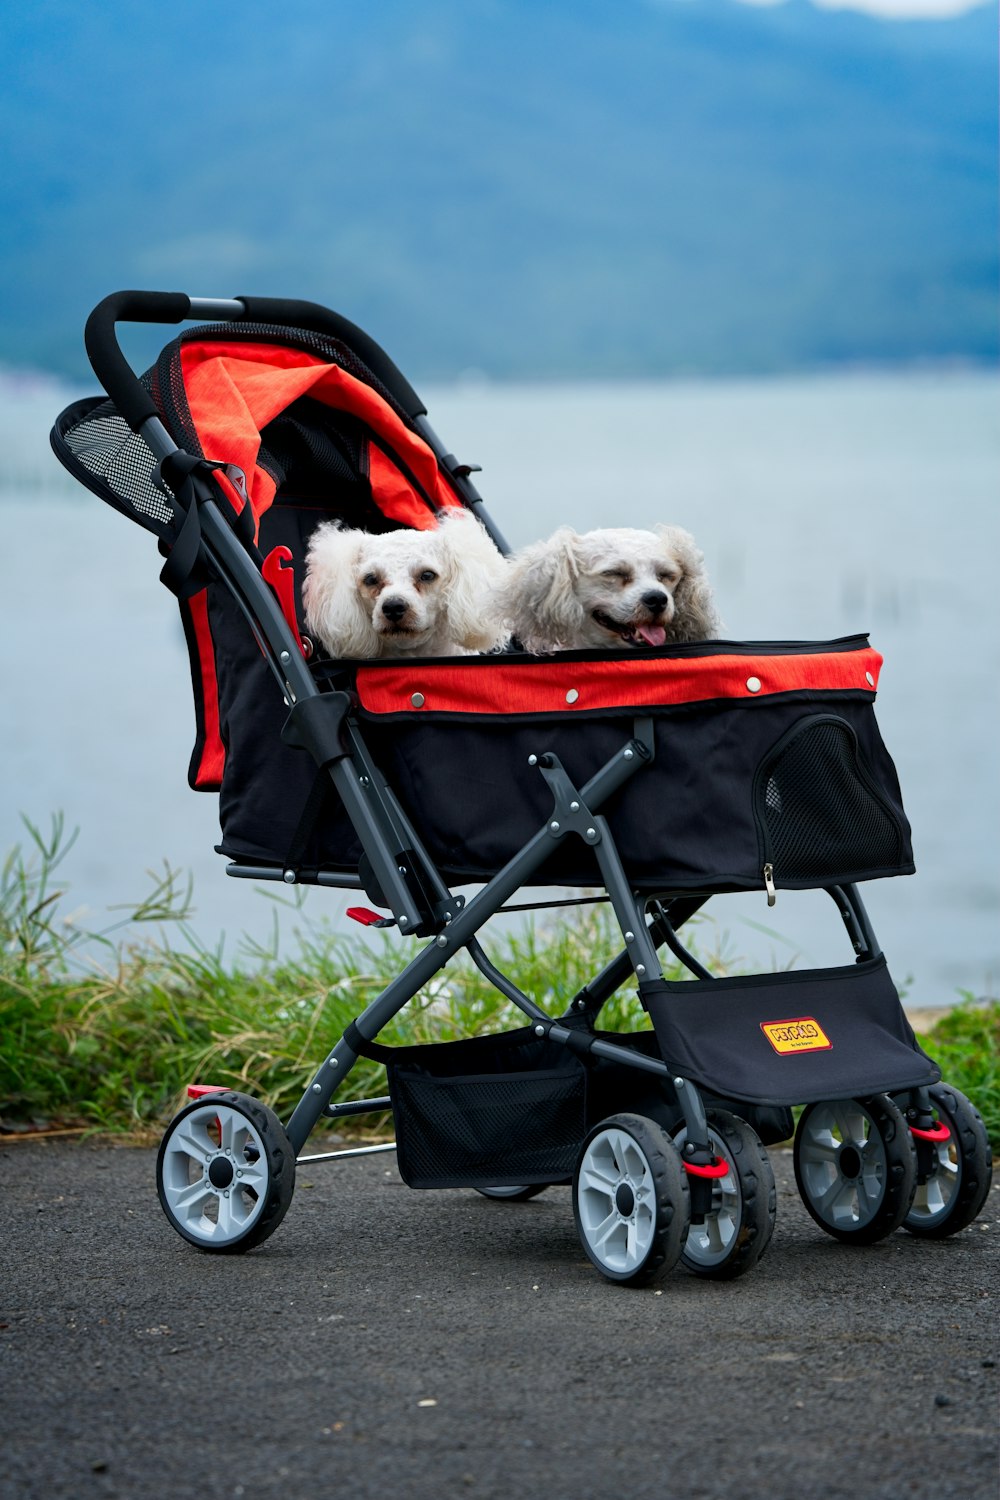 two small white dogs are sitting in a stroller